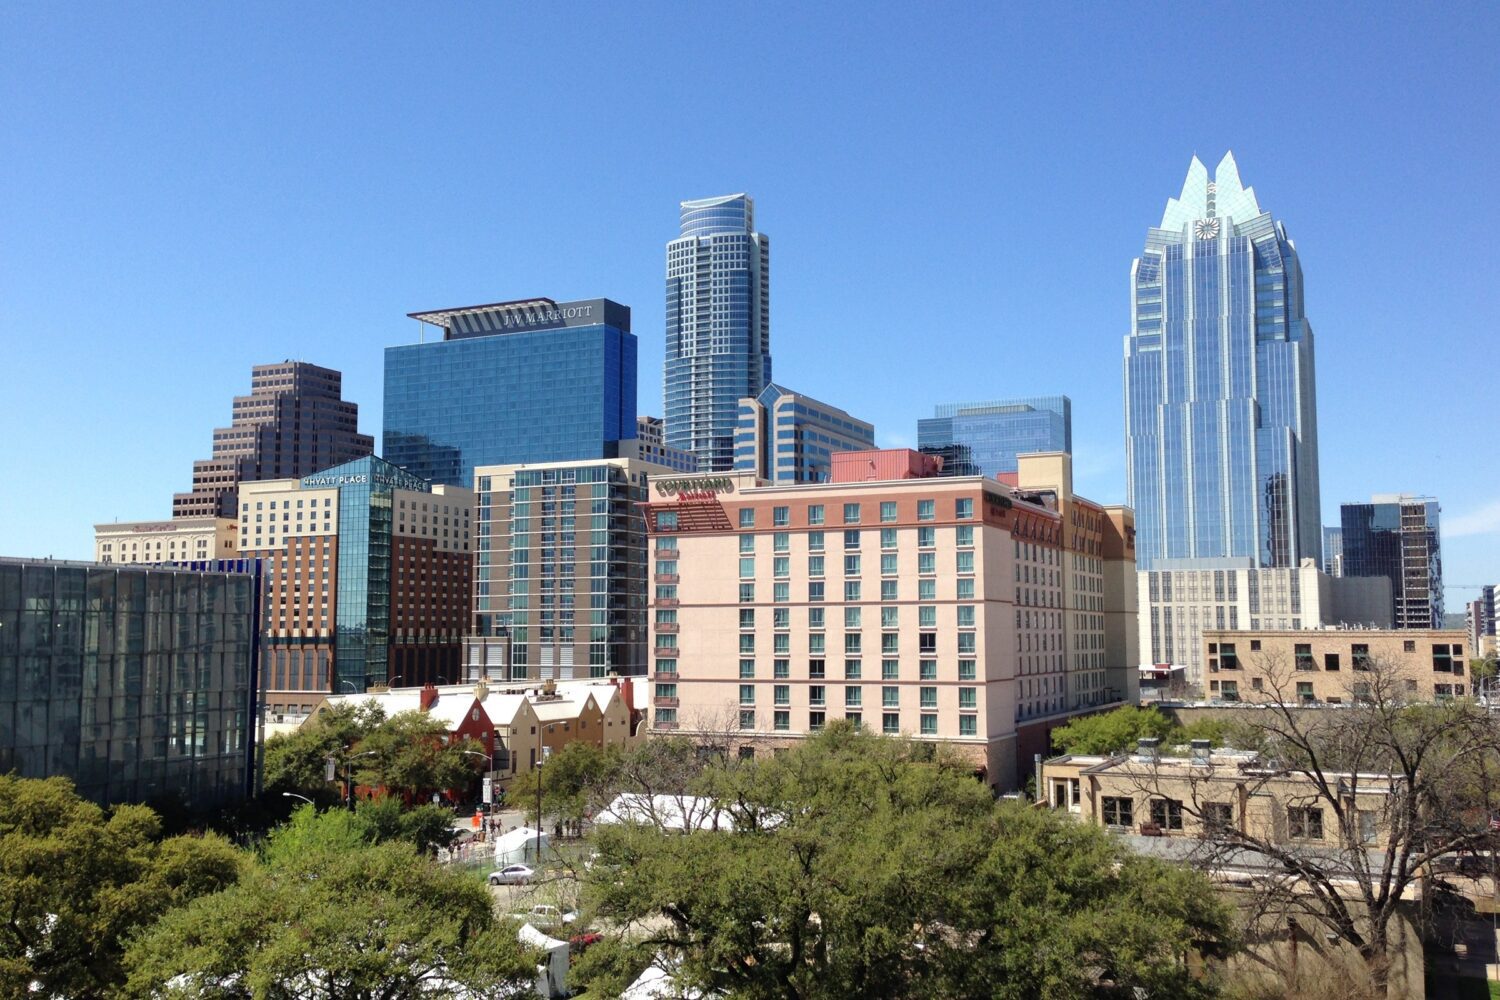 This is a rectangular image showing concrete buildings under a vibrant blue sky in Austin, Texas, United States. The modern architecture stands tall against the backdrop of the clear sky, creating a striking contrast. The scene portrays a sunny day with a sense of urbanity and architectural beauty